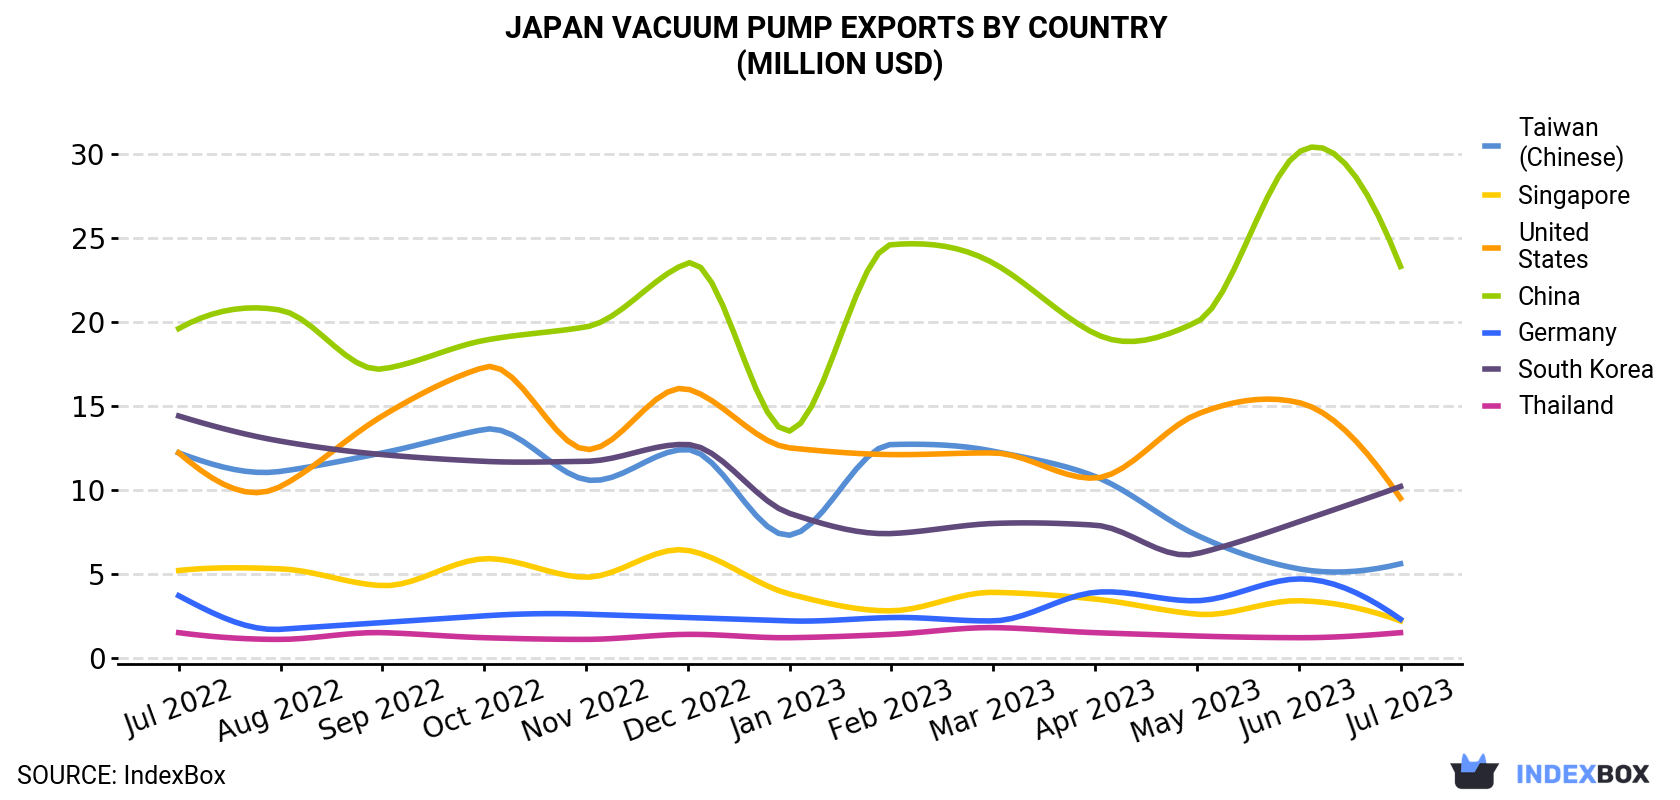 Japan Vacuum Pump Exports By Country (Million USD)